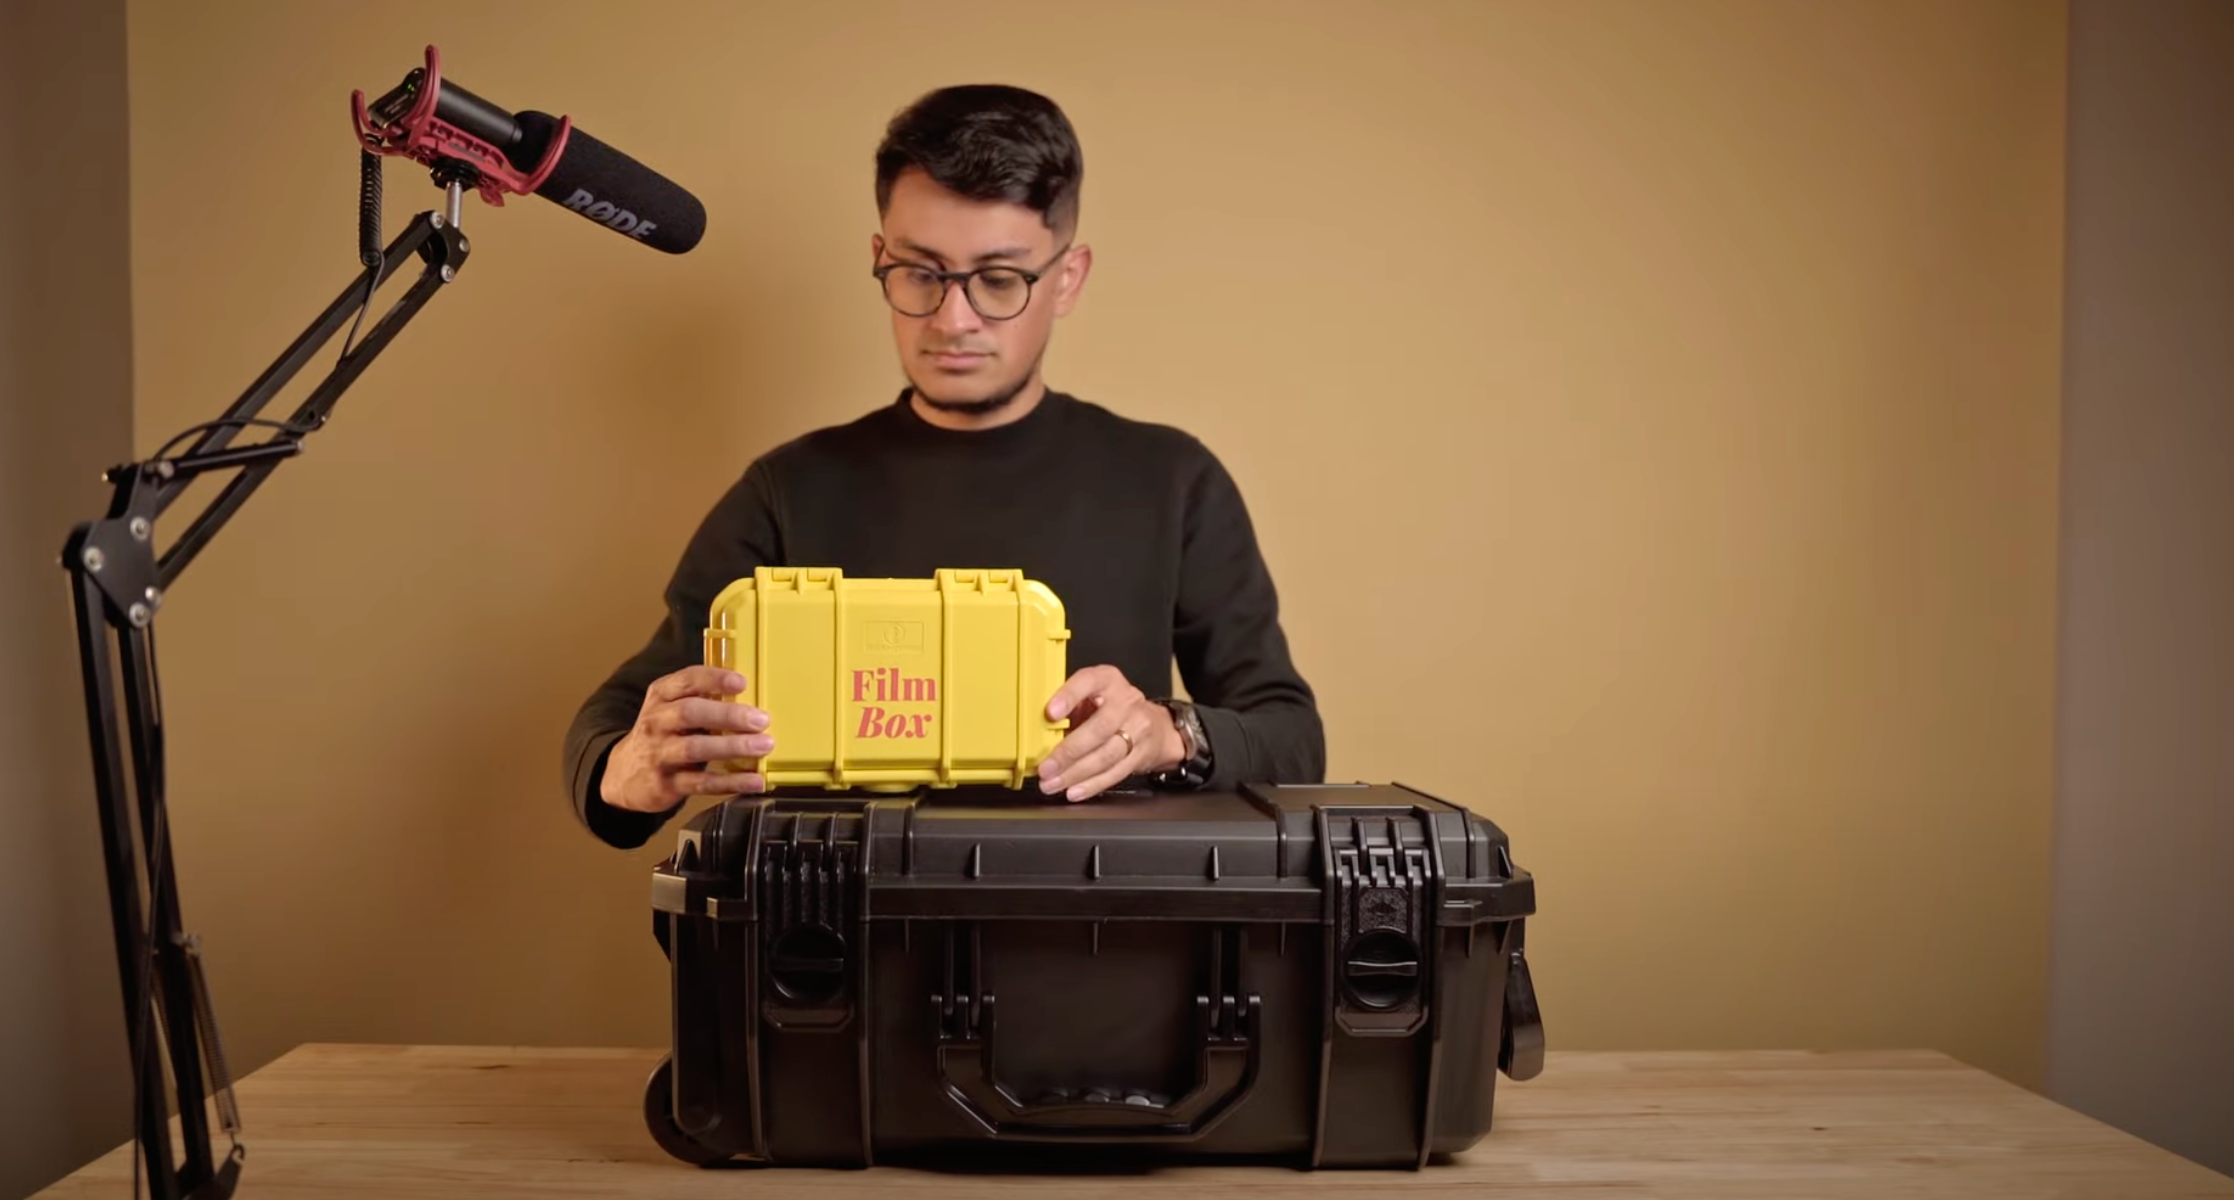 You need this to protecct your camera gear and film